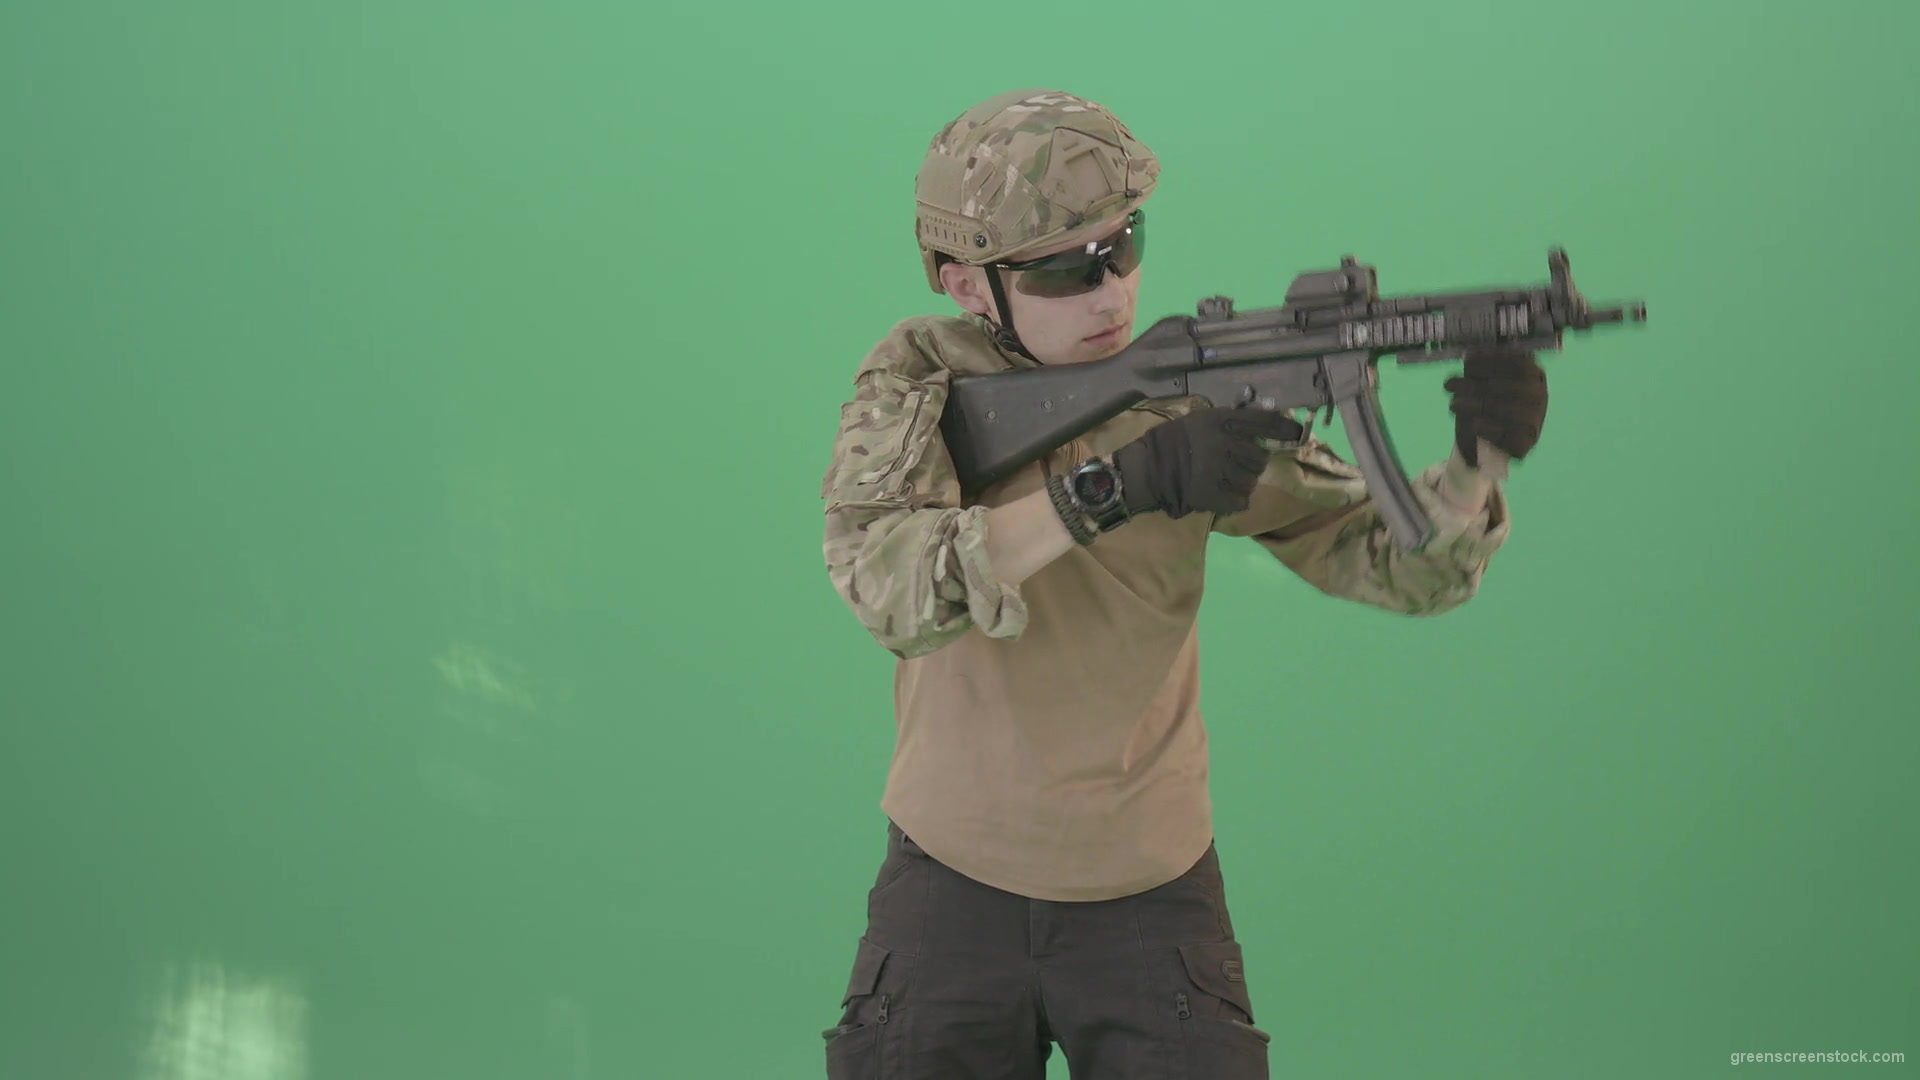 Soldier-in-army-uniform-shooting-with-gun-fire-machine-isolated-on-green-screen-4K-Video-Footage-1920_009 Green Screen Stock